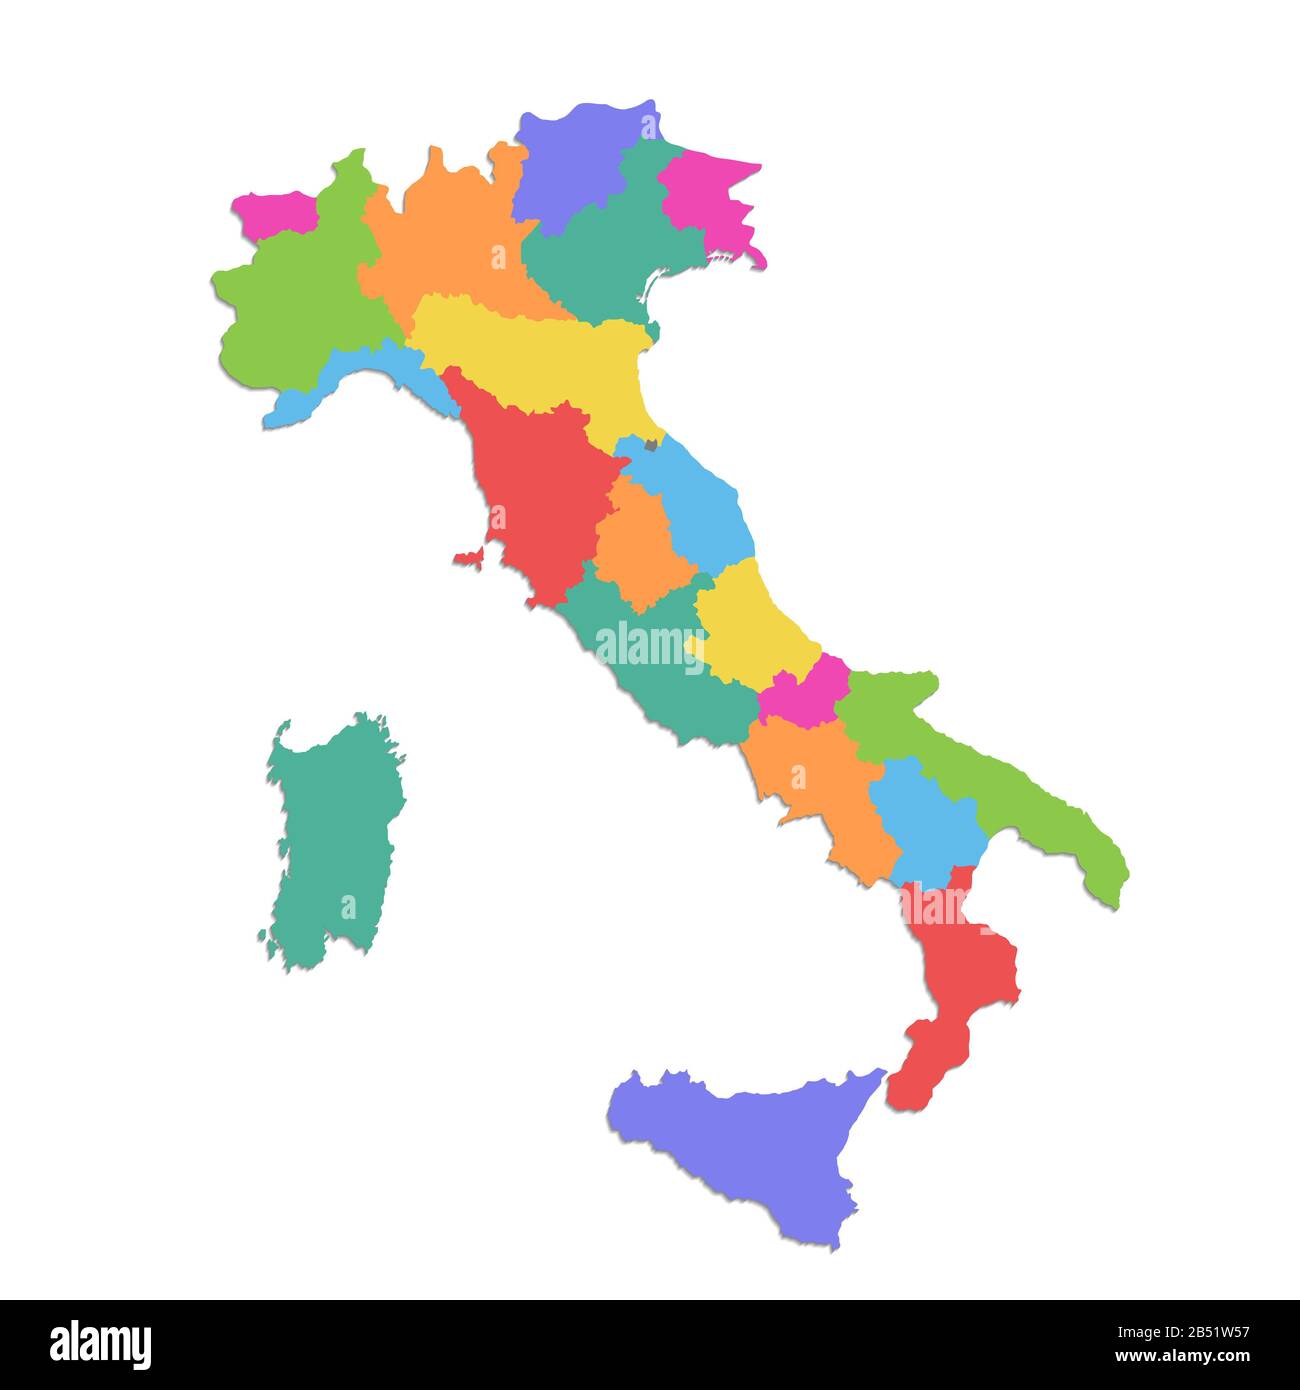 Italy map, administrative division, colors map isolated on white background blank Stock Photo